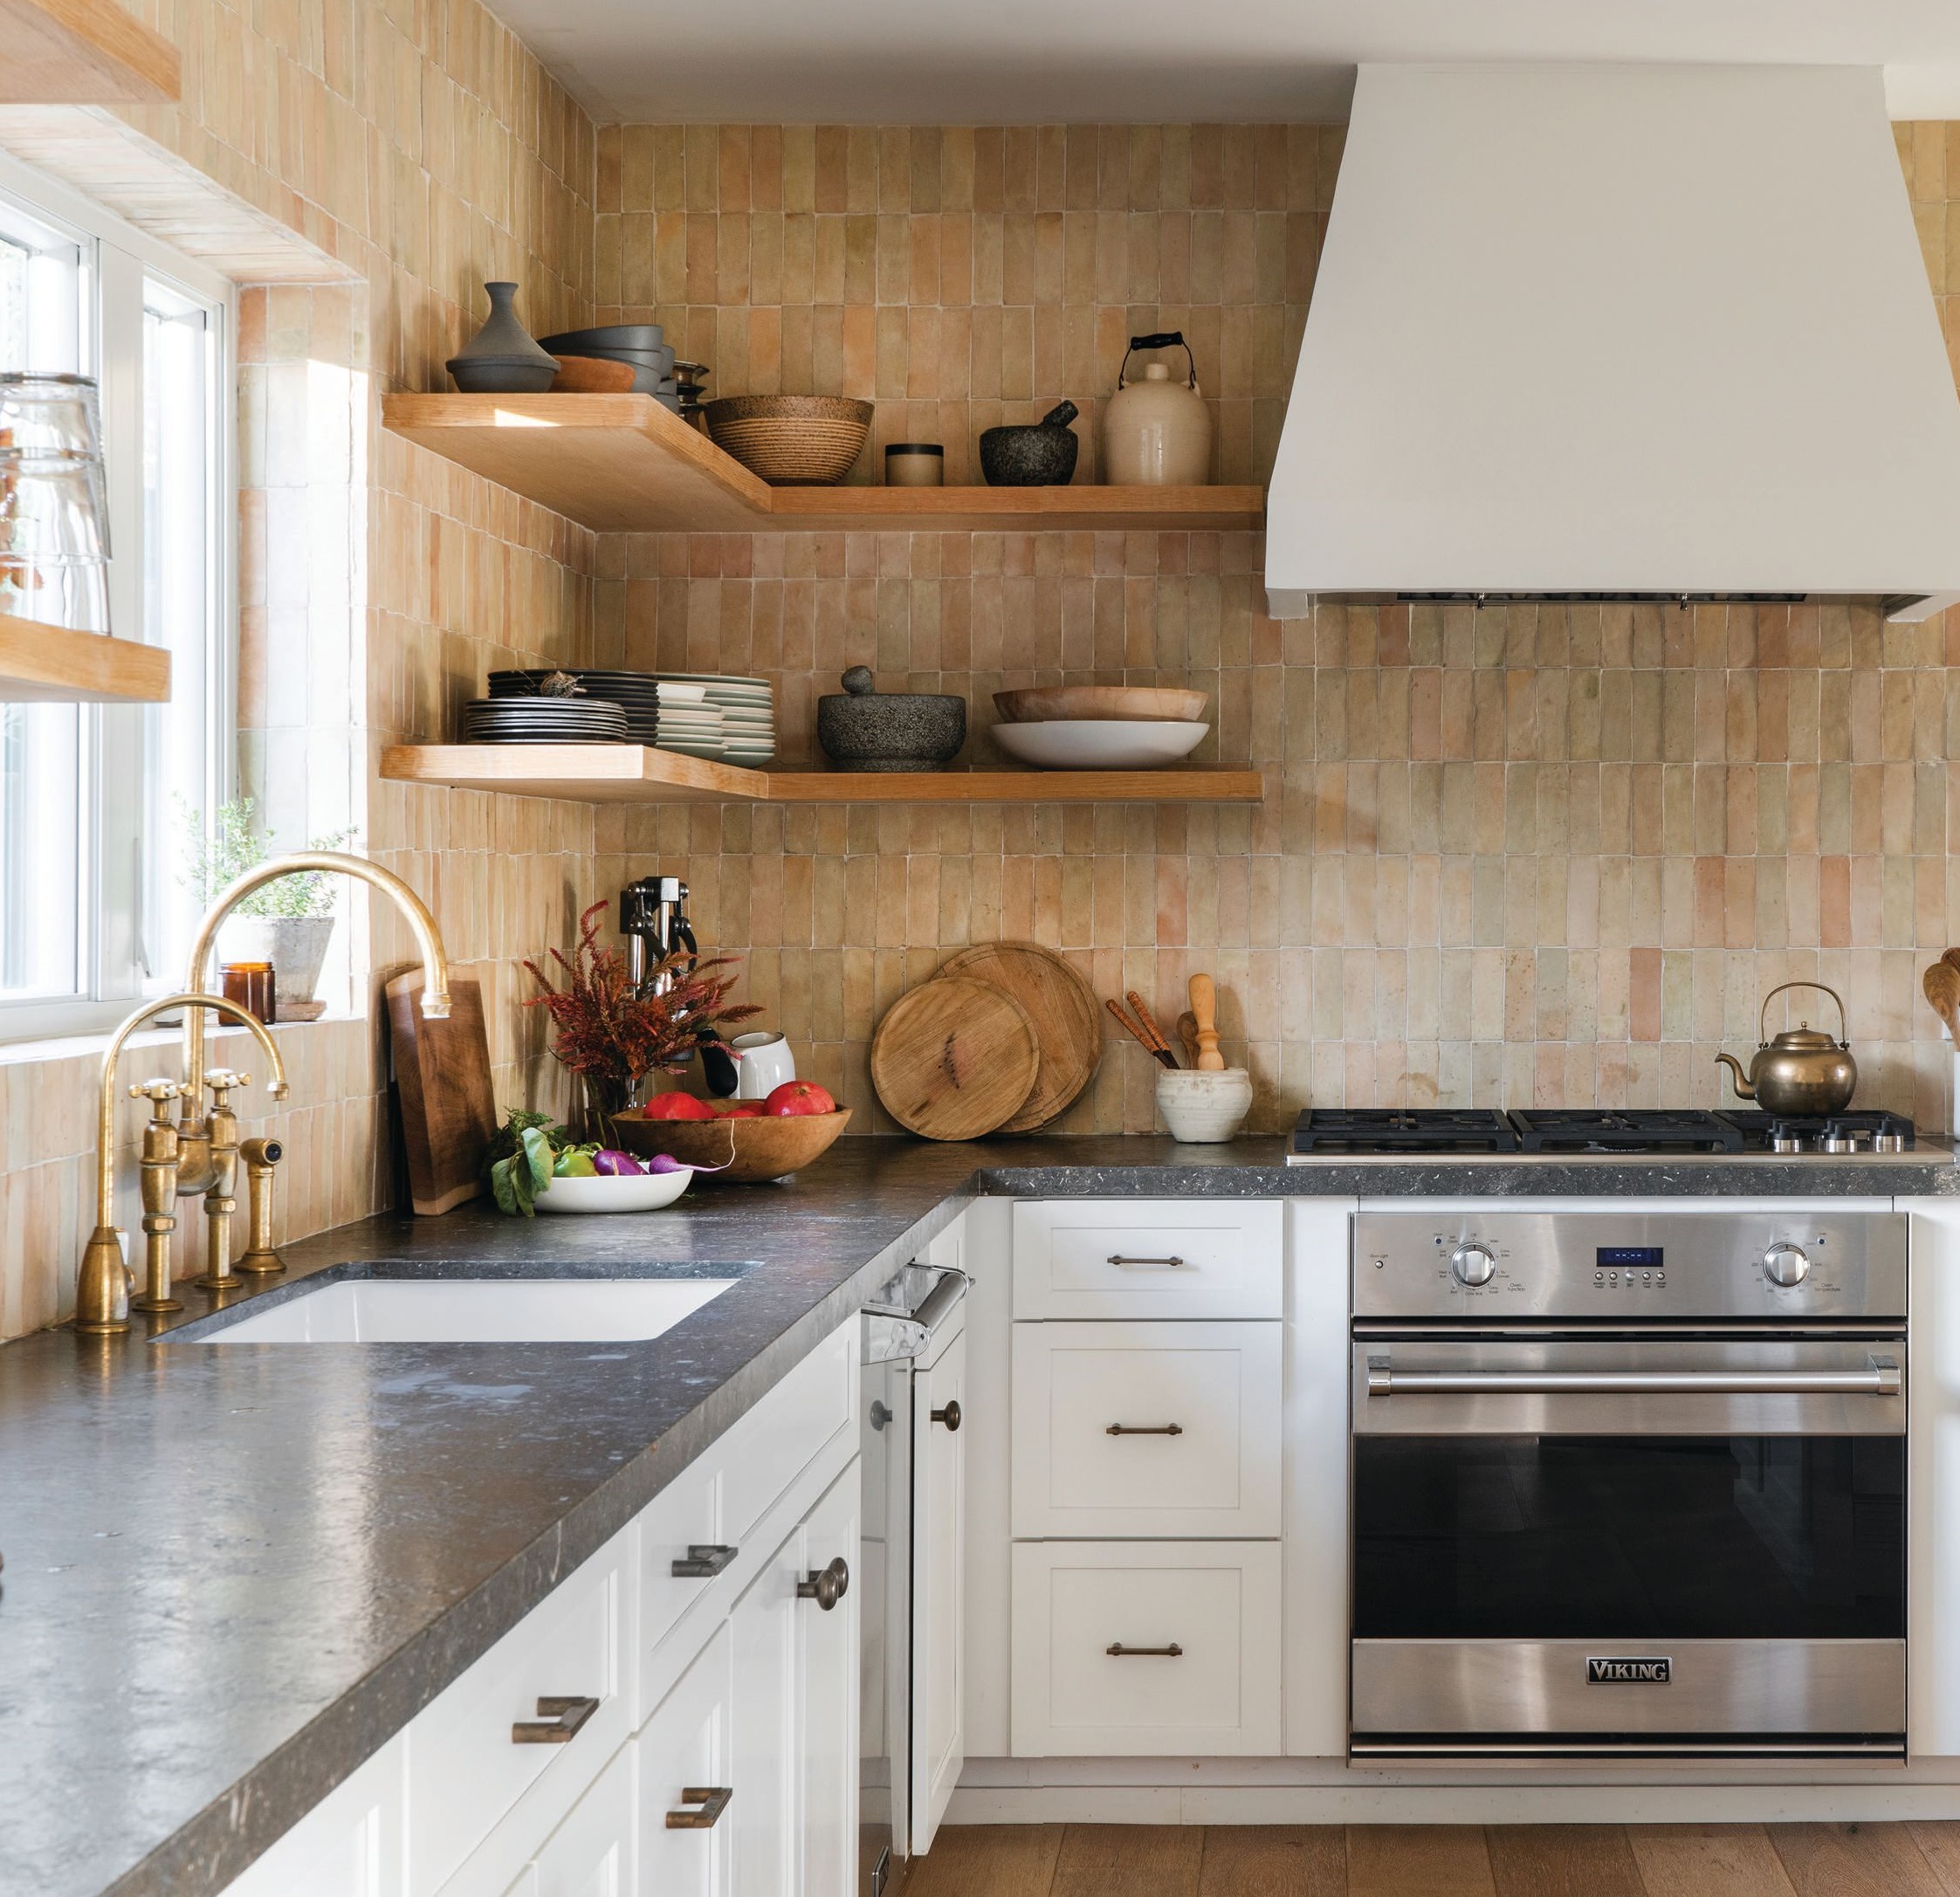 Clé’s natural zellige tiles add warmth to the kitchen PHOTOGRAPHED BY GAVIN CATER